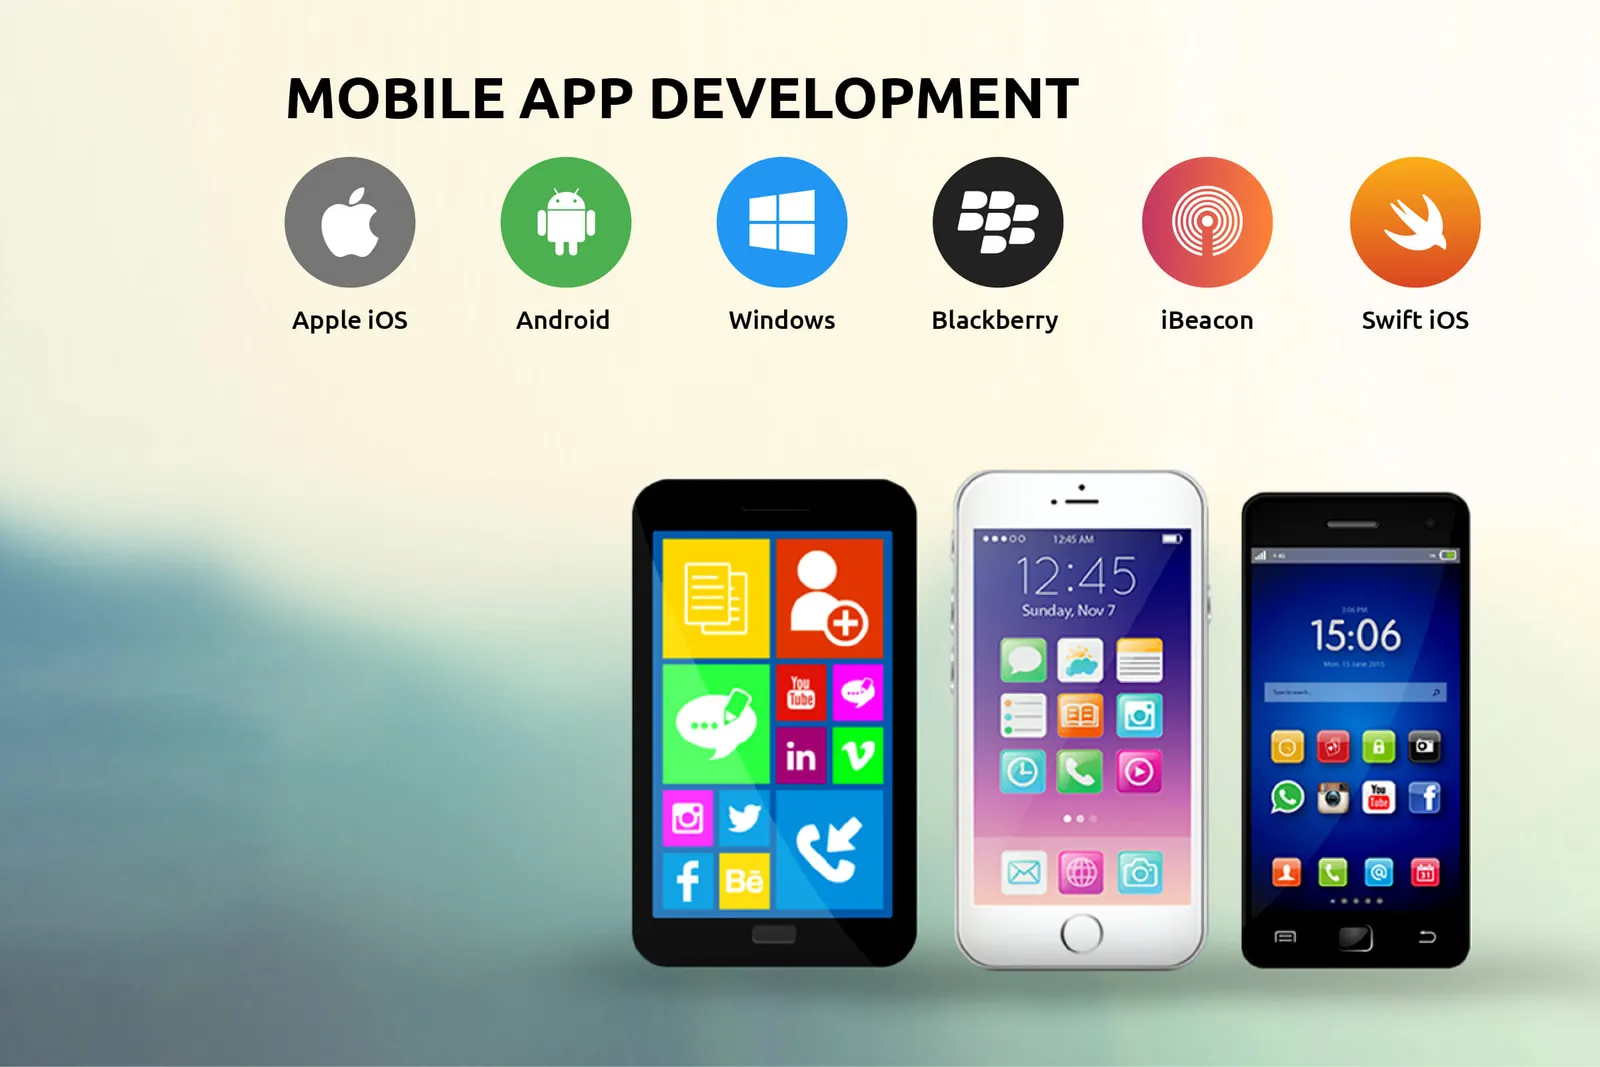 What Are the New Trends in Mobile Application Development?